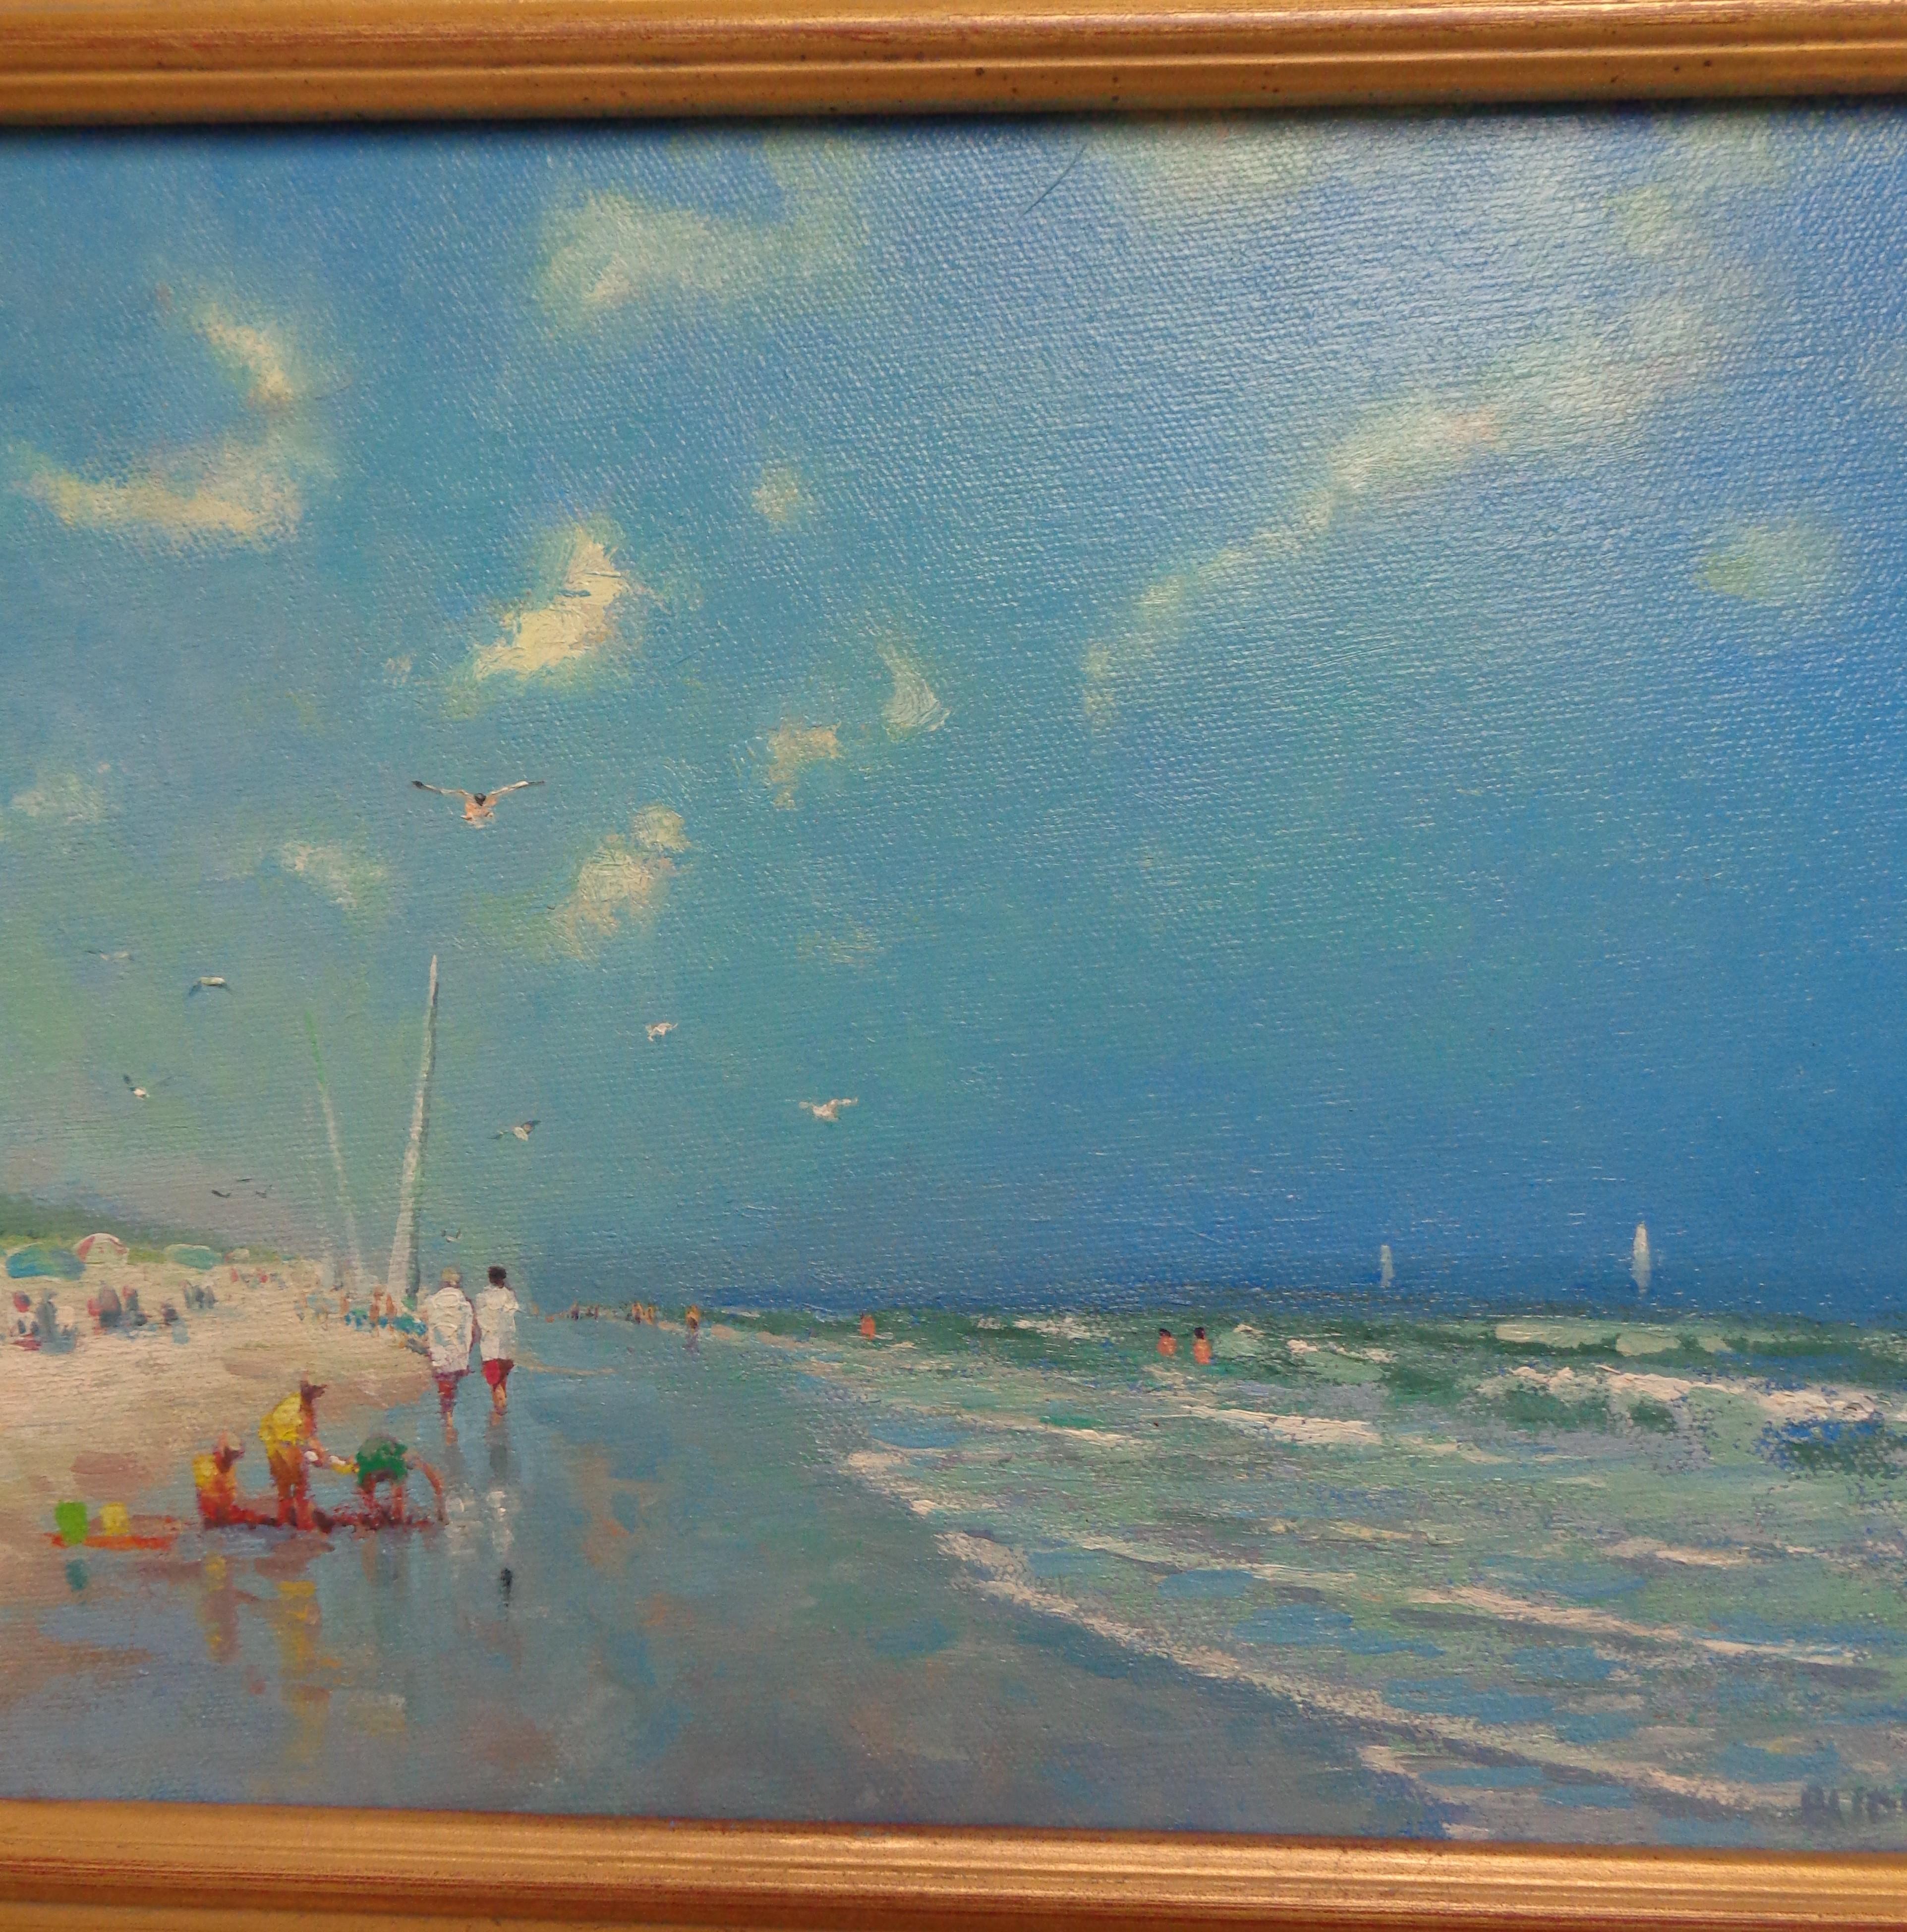 Summertime is an oil painting on canvas by award winning contemporary artist Michael Budden that showcases a beautiful beach scene created in an impressionistic realism style. The image measures 9 x 12 unframed and 15 x 18.13 framed. Please note